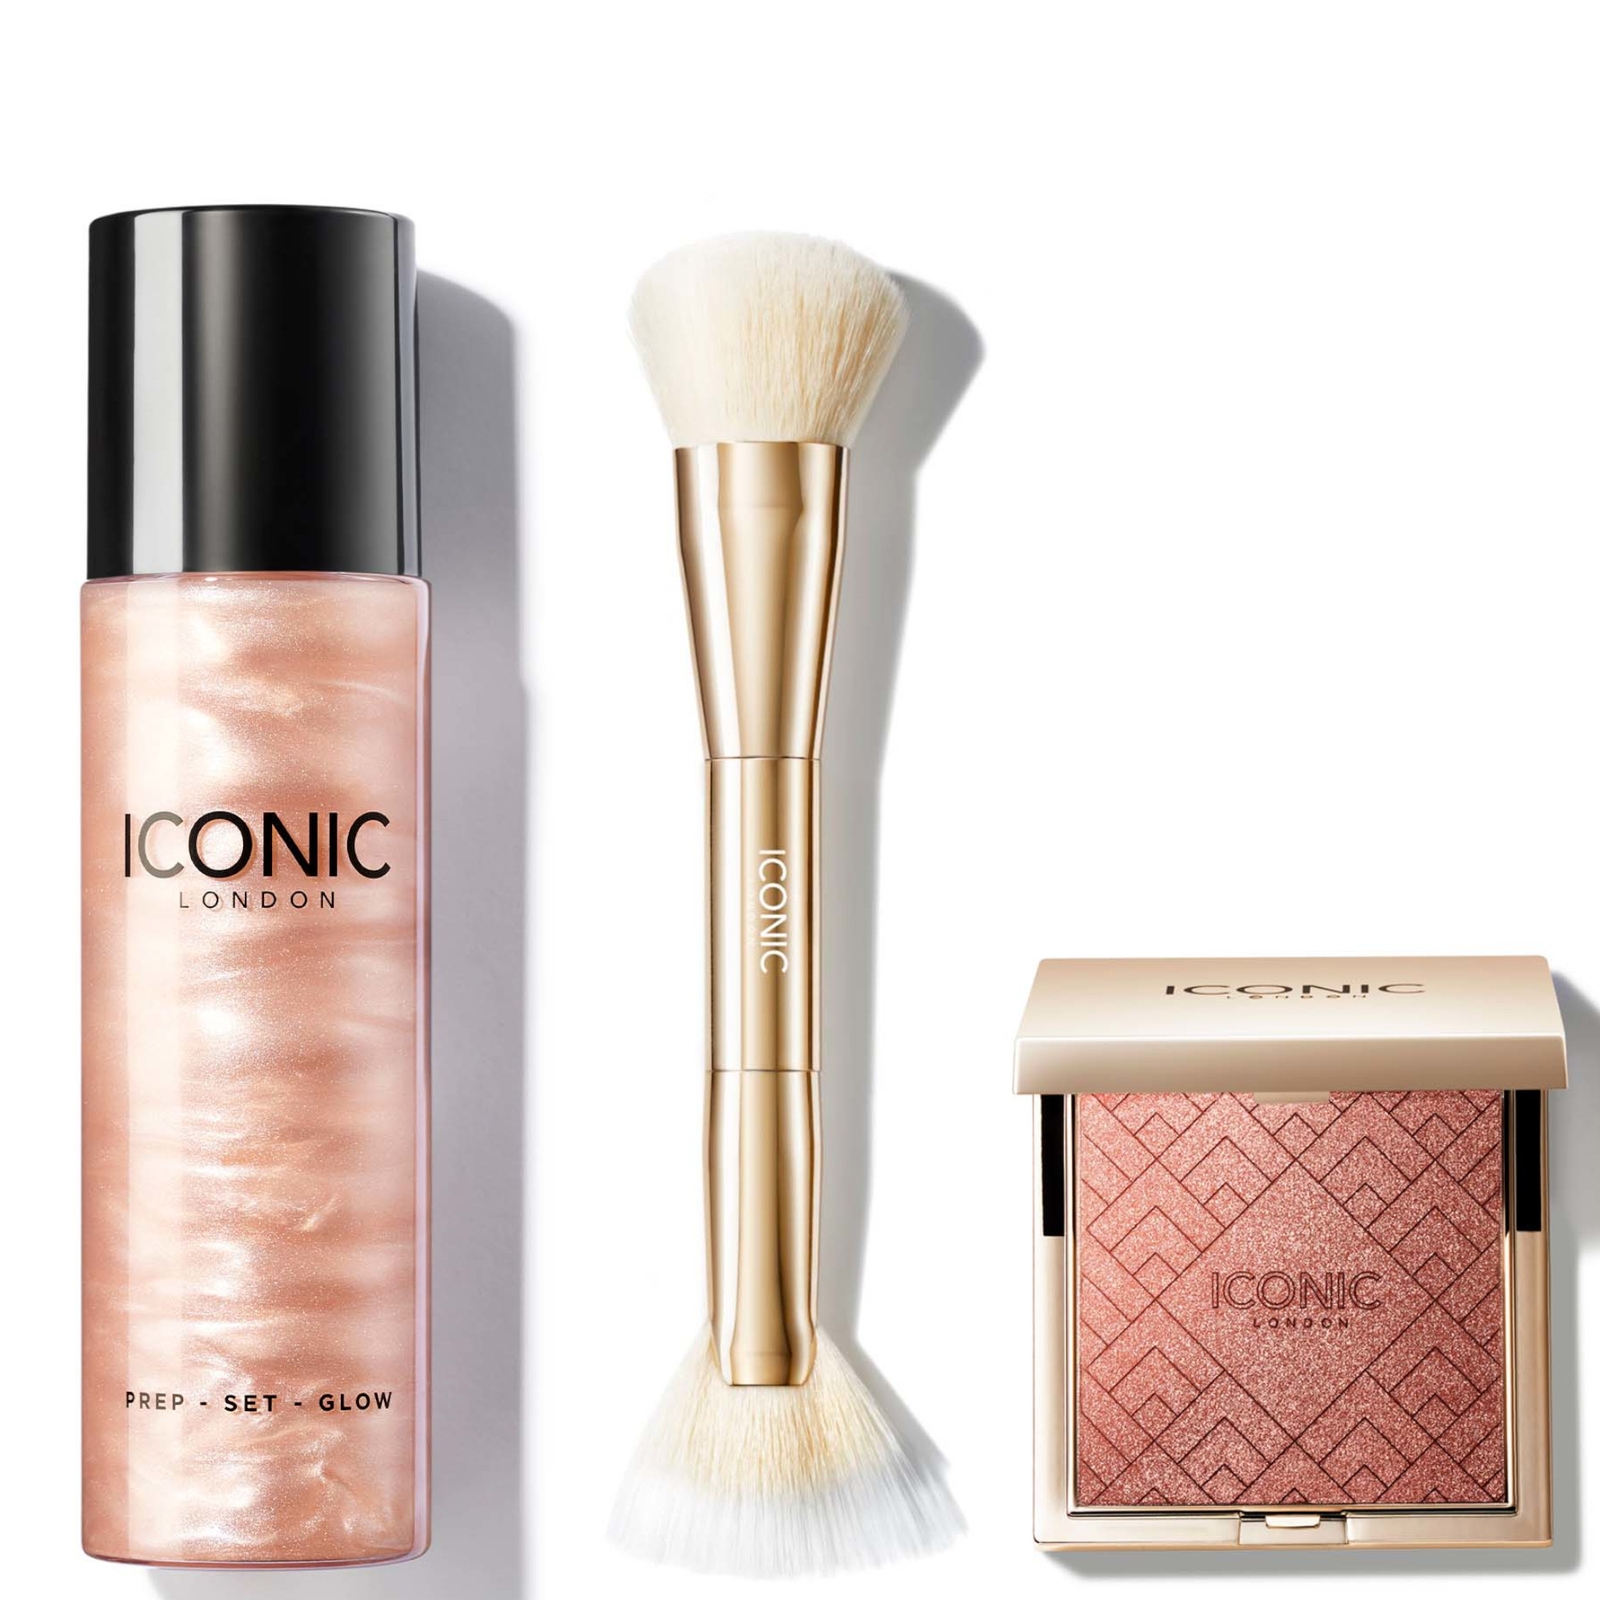 Iconic London Sunkissed Skin Bundle In White